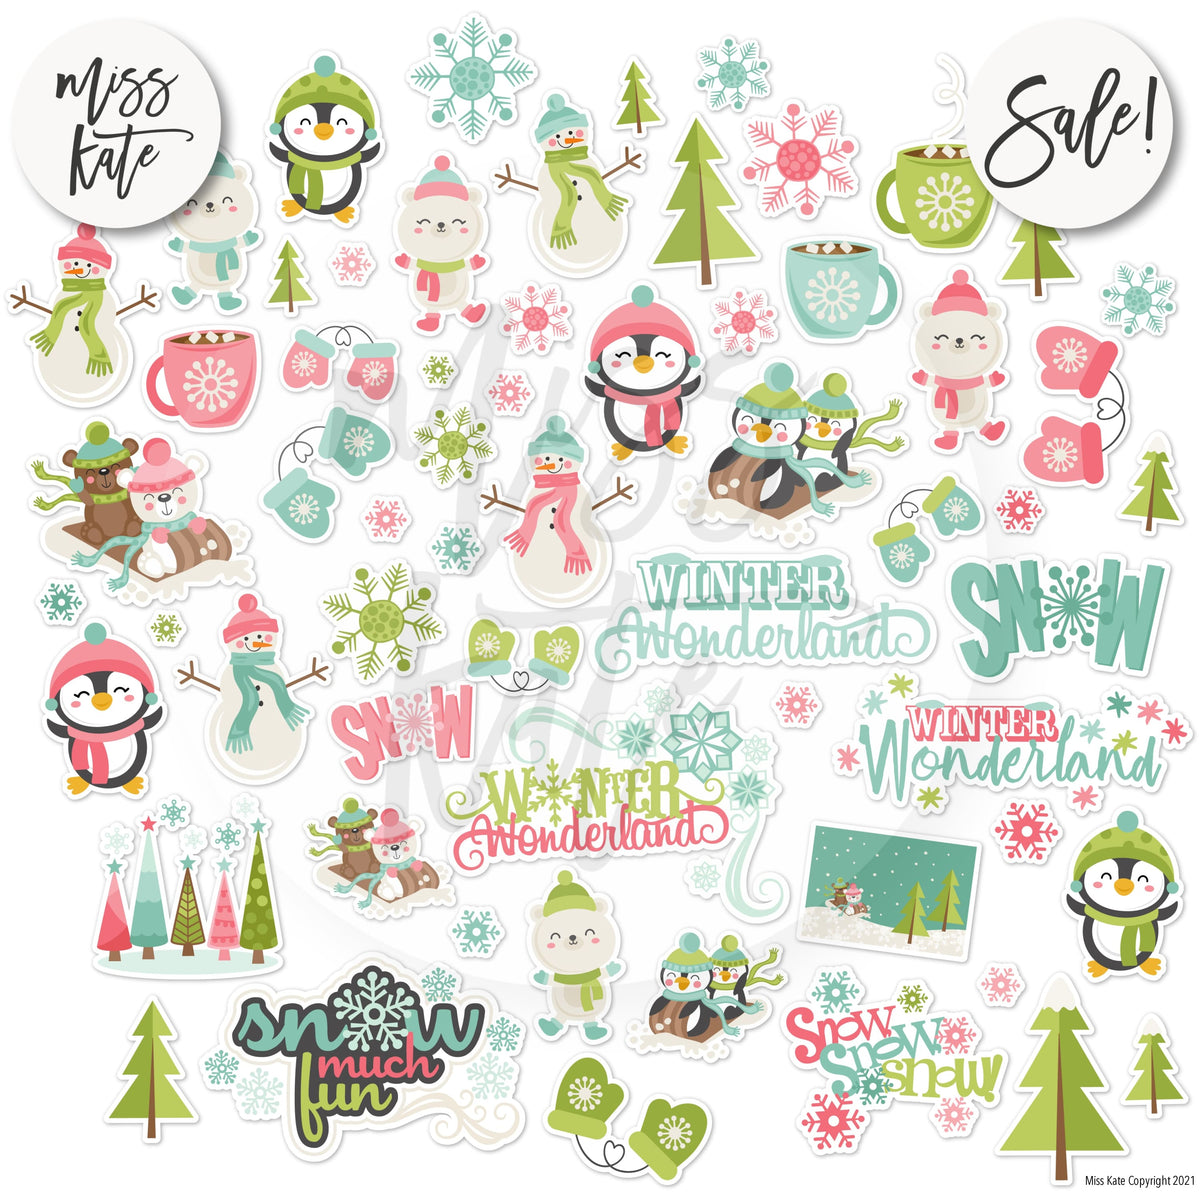 Made in the USA - Scrapbook Paper & Sticker Kit 12x12 Paper & Planner  Stickers – MISS KATE